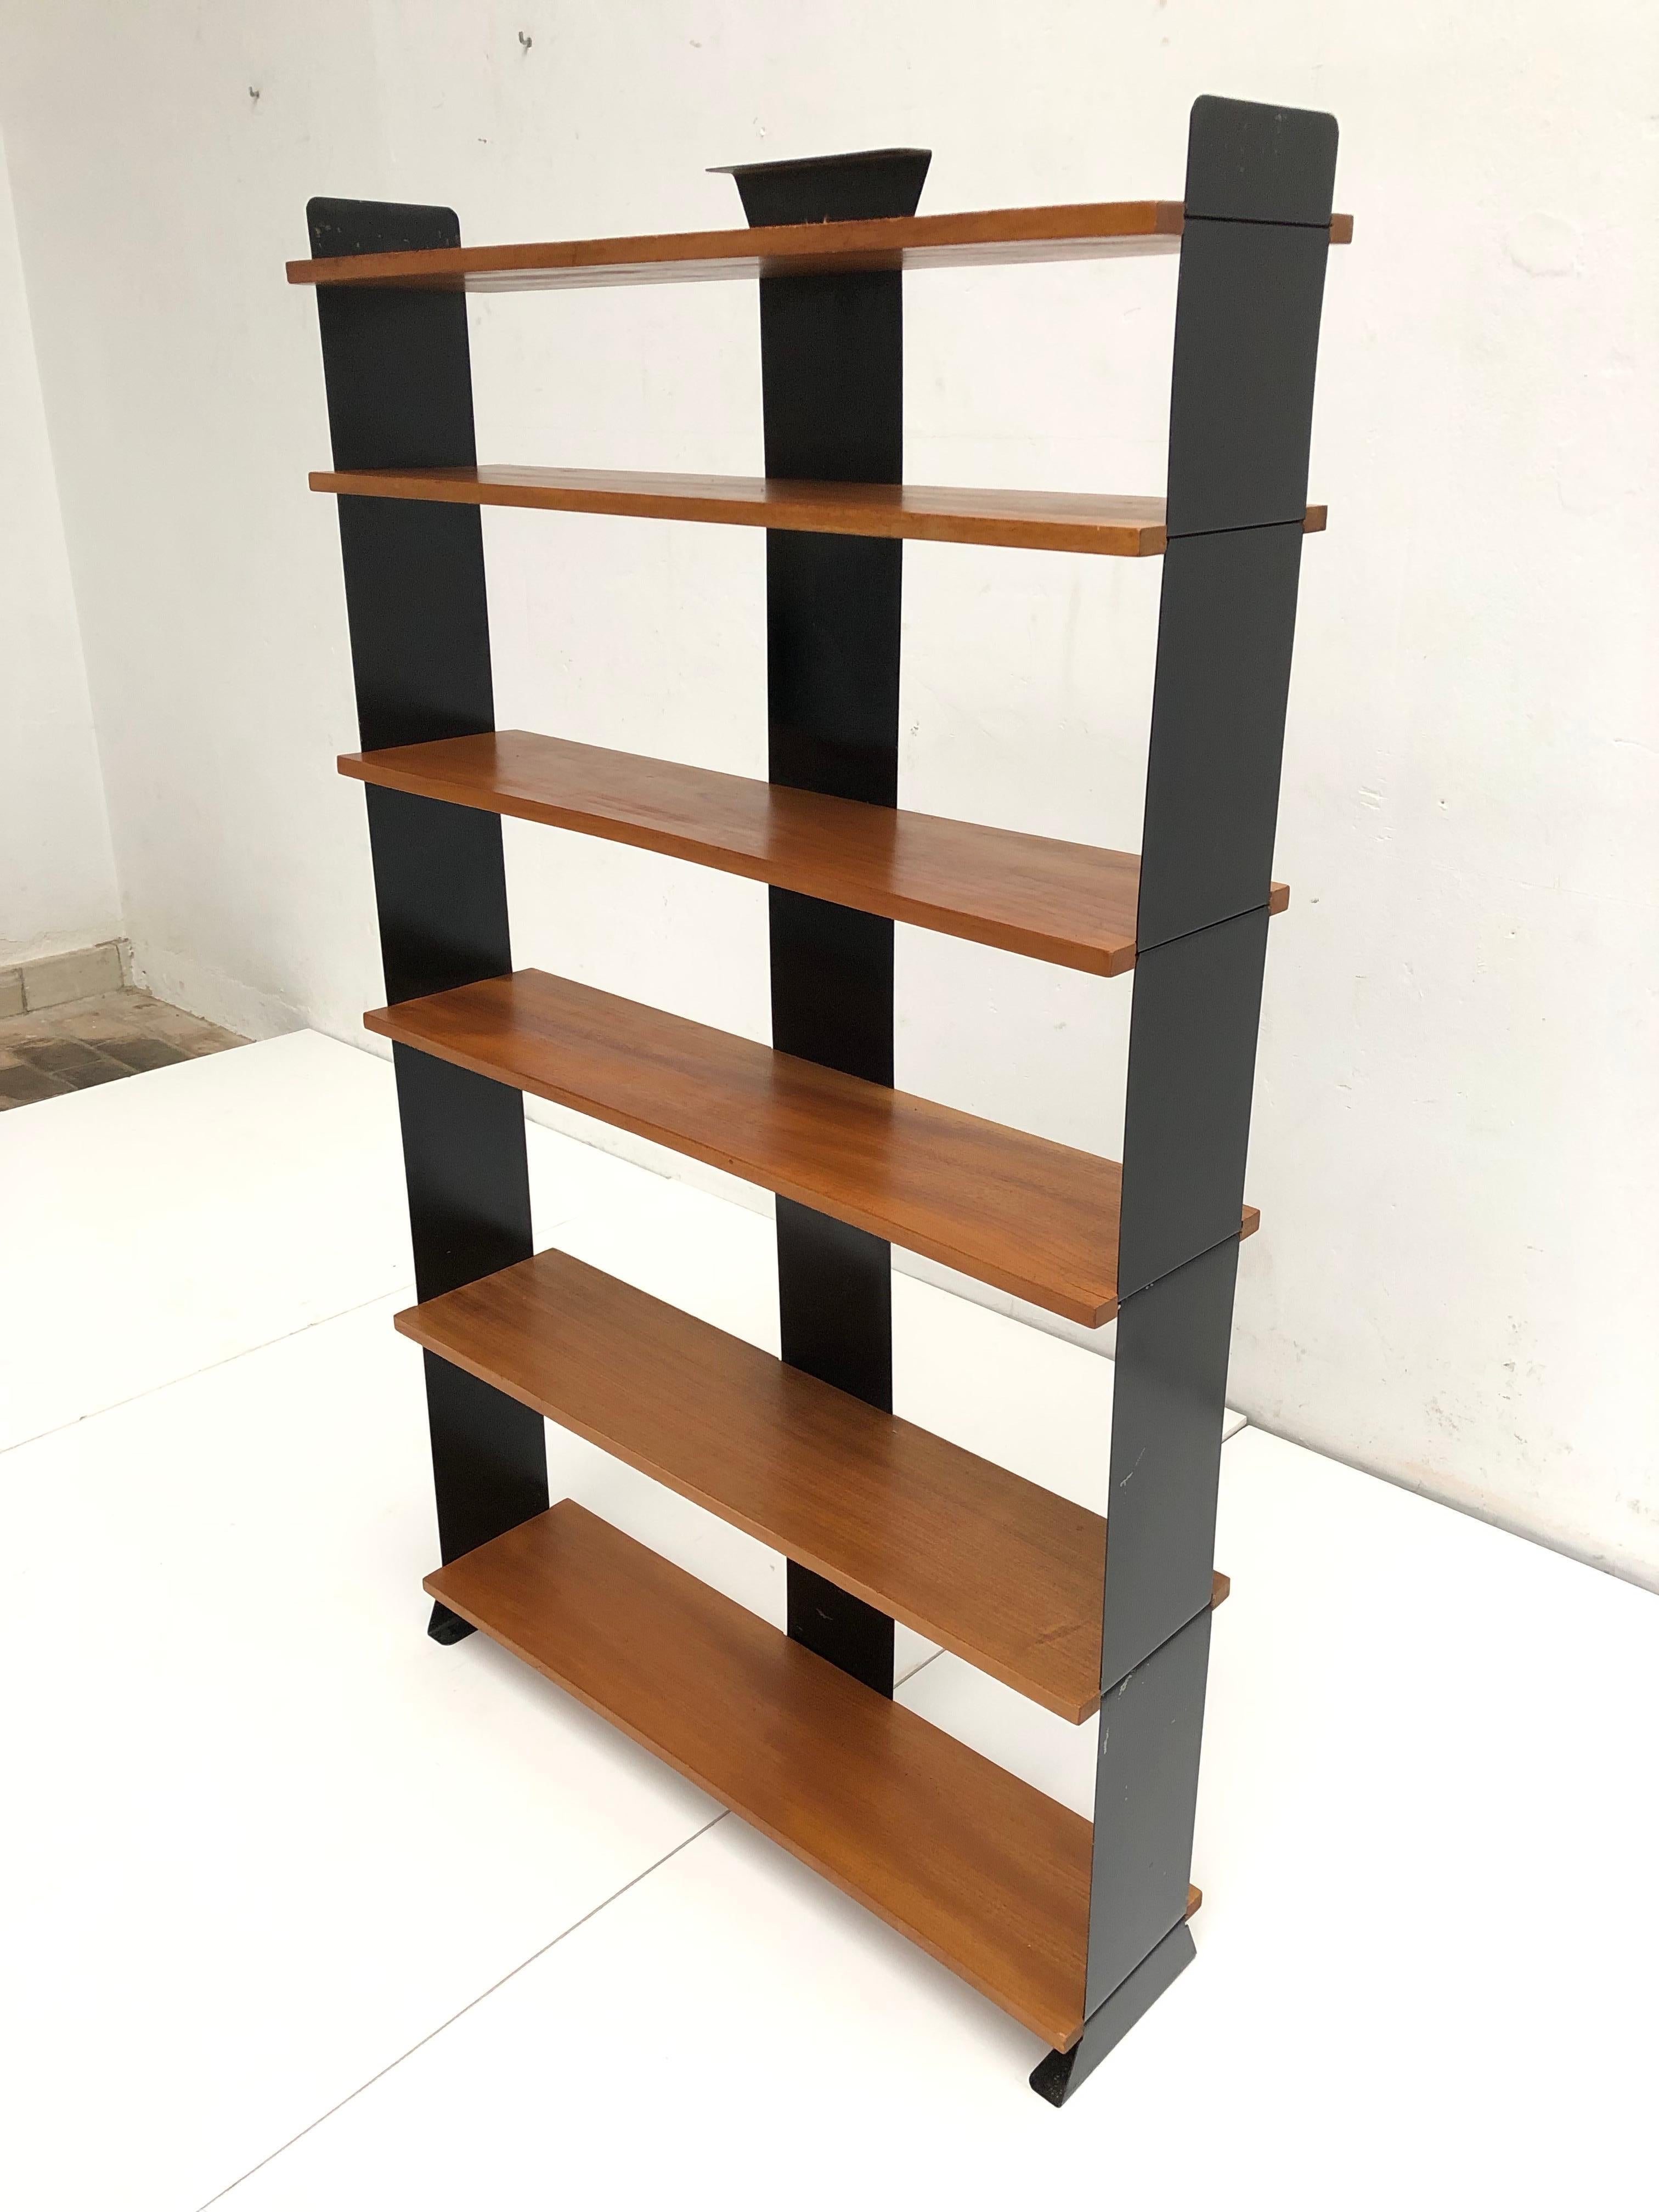 Model 132 freestanding shelving or room divider by Wilhelm Kienzle.

This minimal and modernist Swiss design dates back to 1930 and was produced by Embru Werke and distributed by Wohnbedarf AG 

A genius modular shelving system that can be